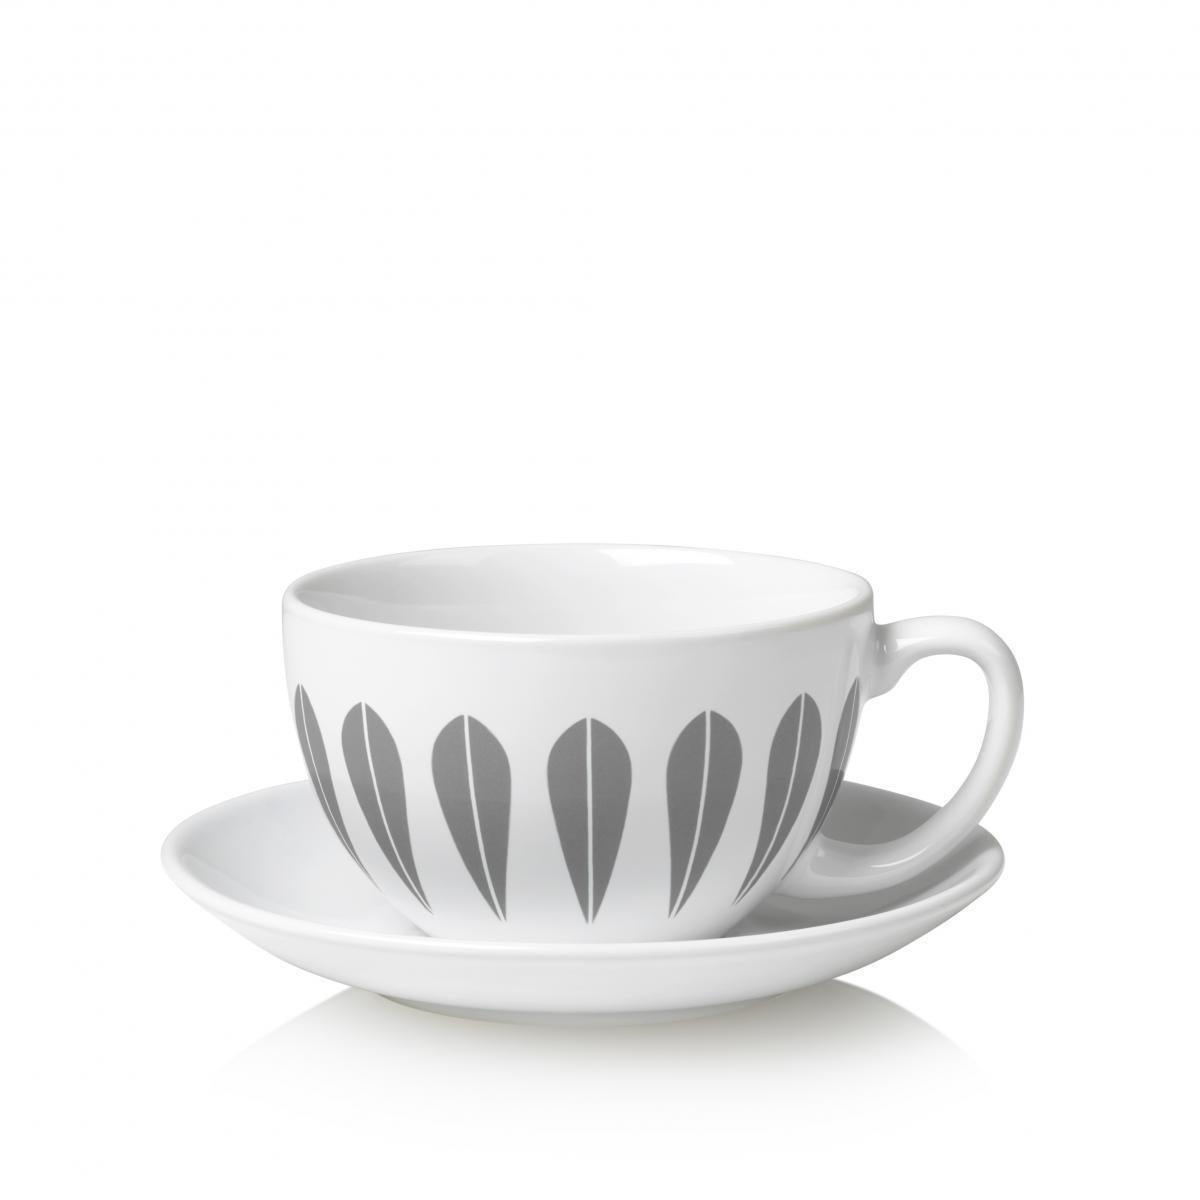 Lucie Kaas Arne Clausen Collection Cups W. Saucer Gray, 10 cm